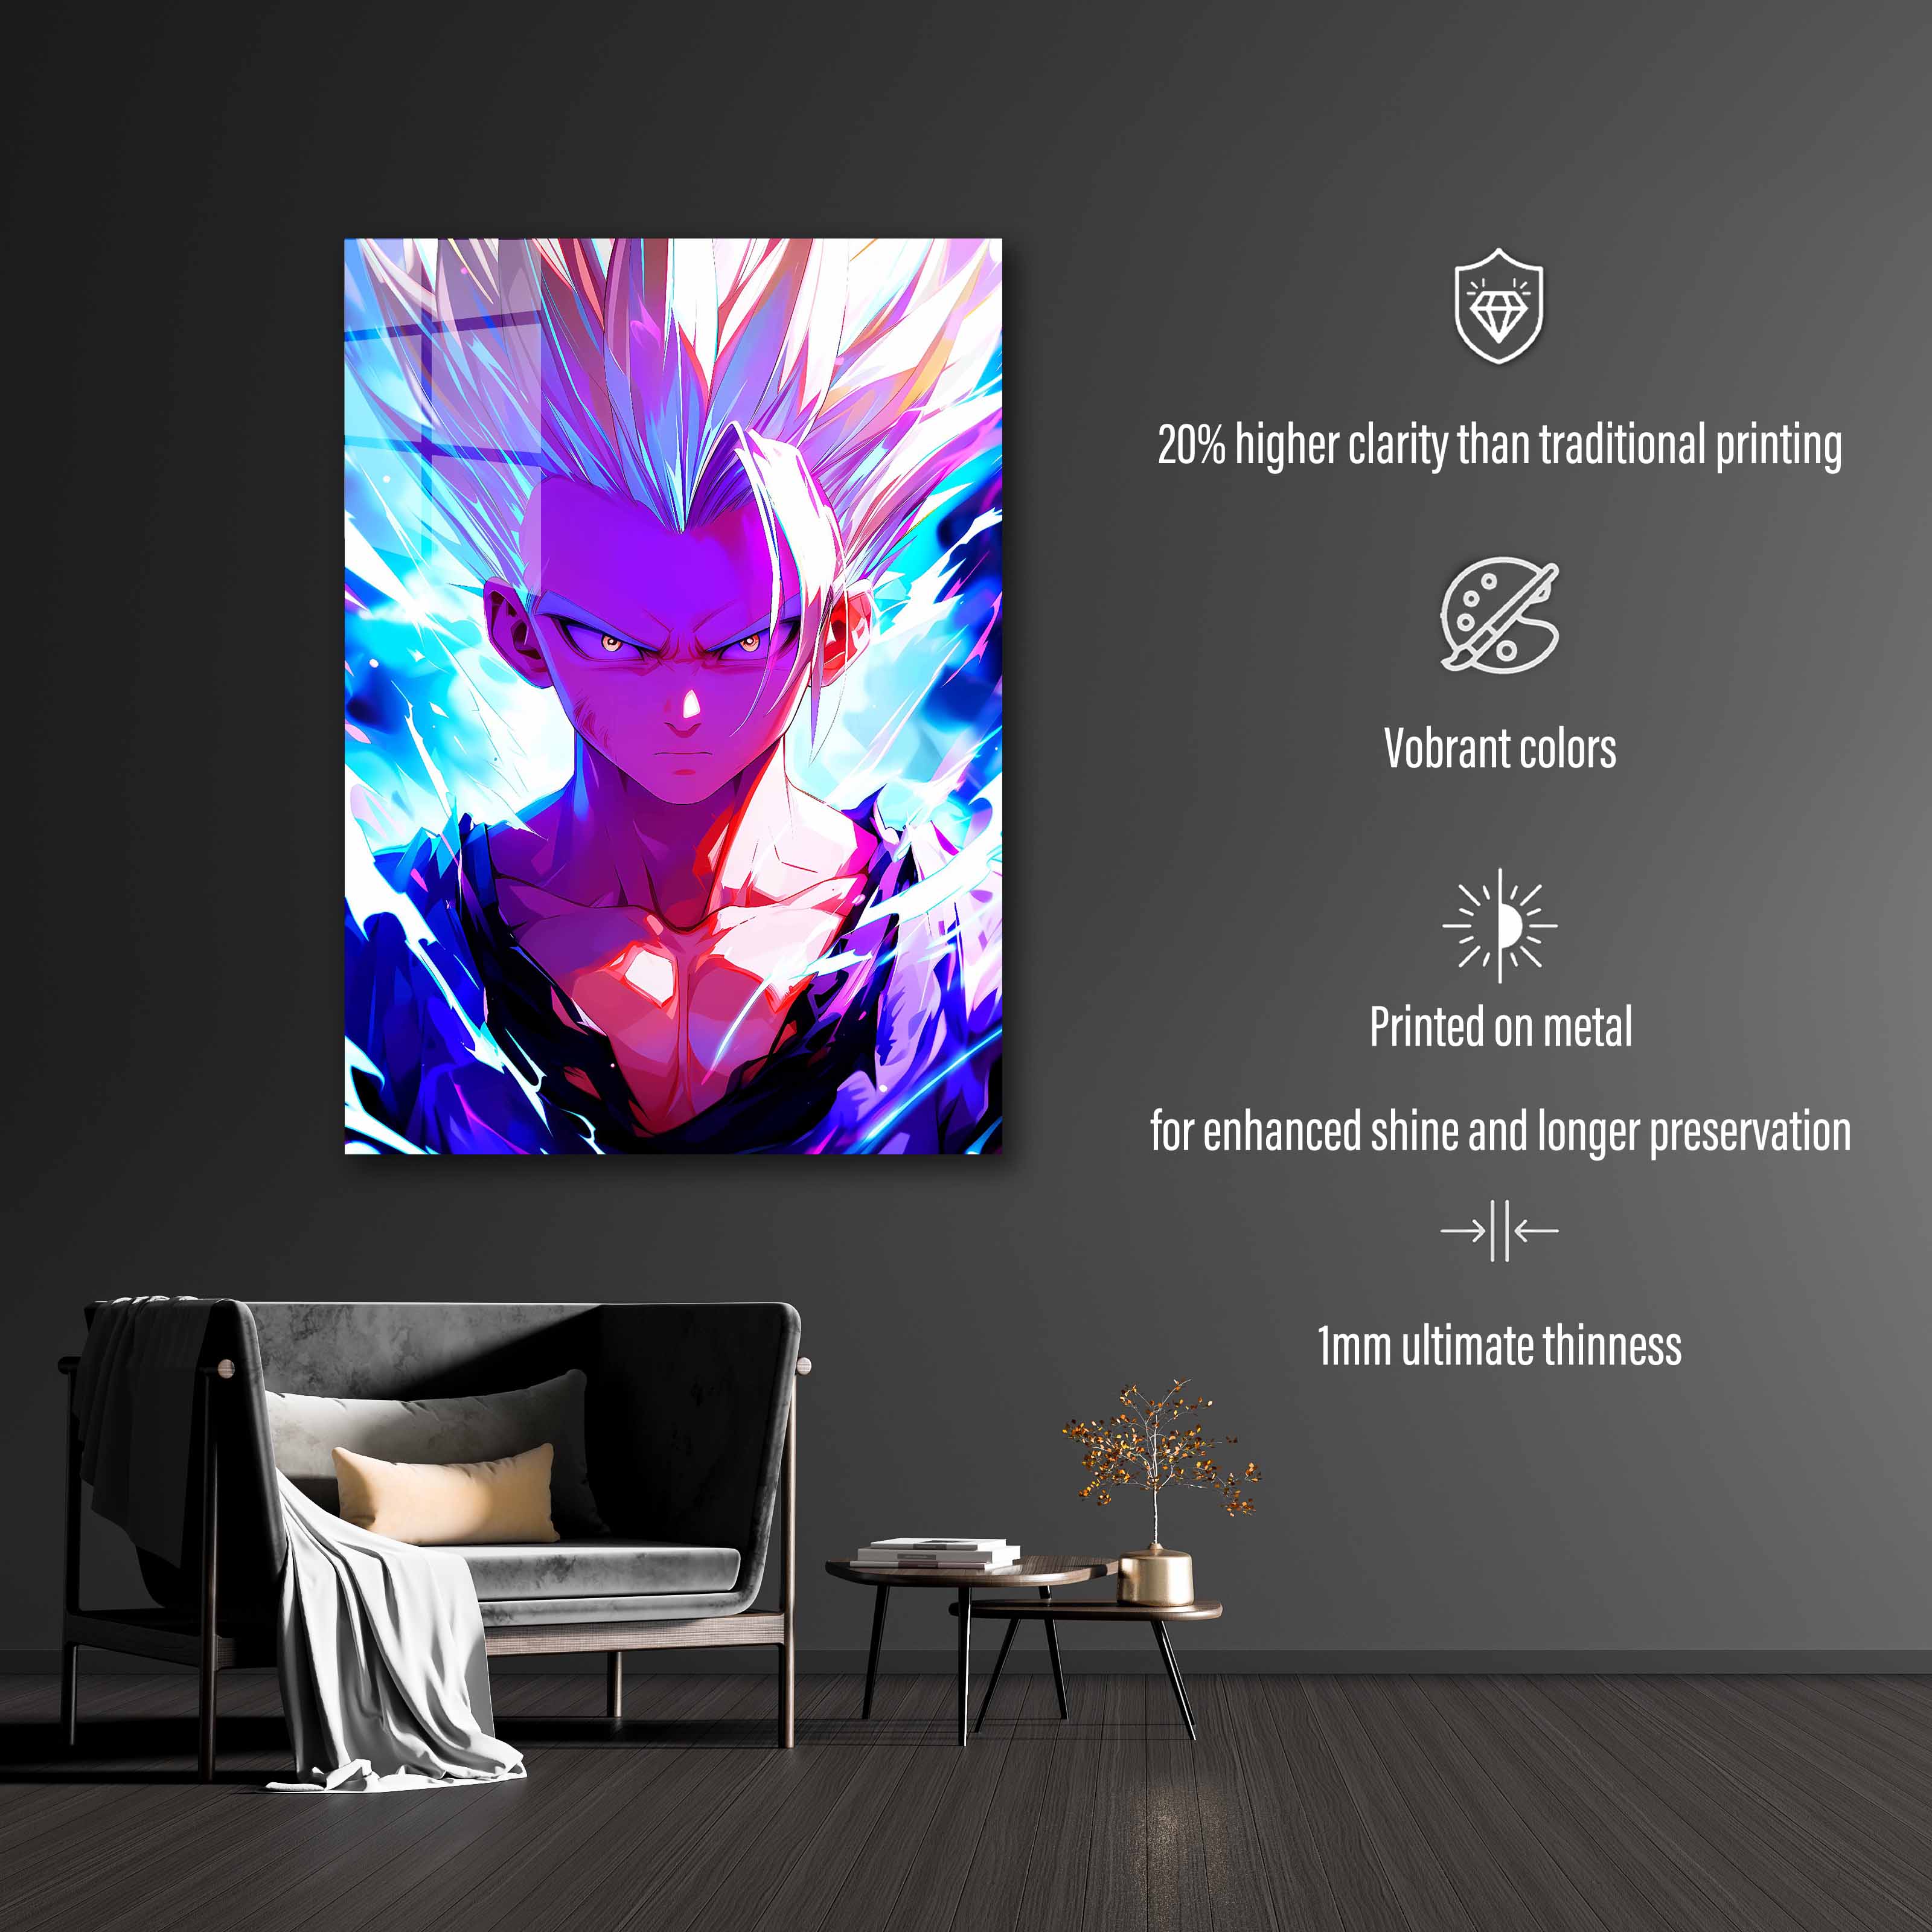 Gohan in his form _Super Sayan_-designed by @ai.spectrys